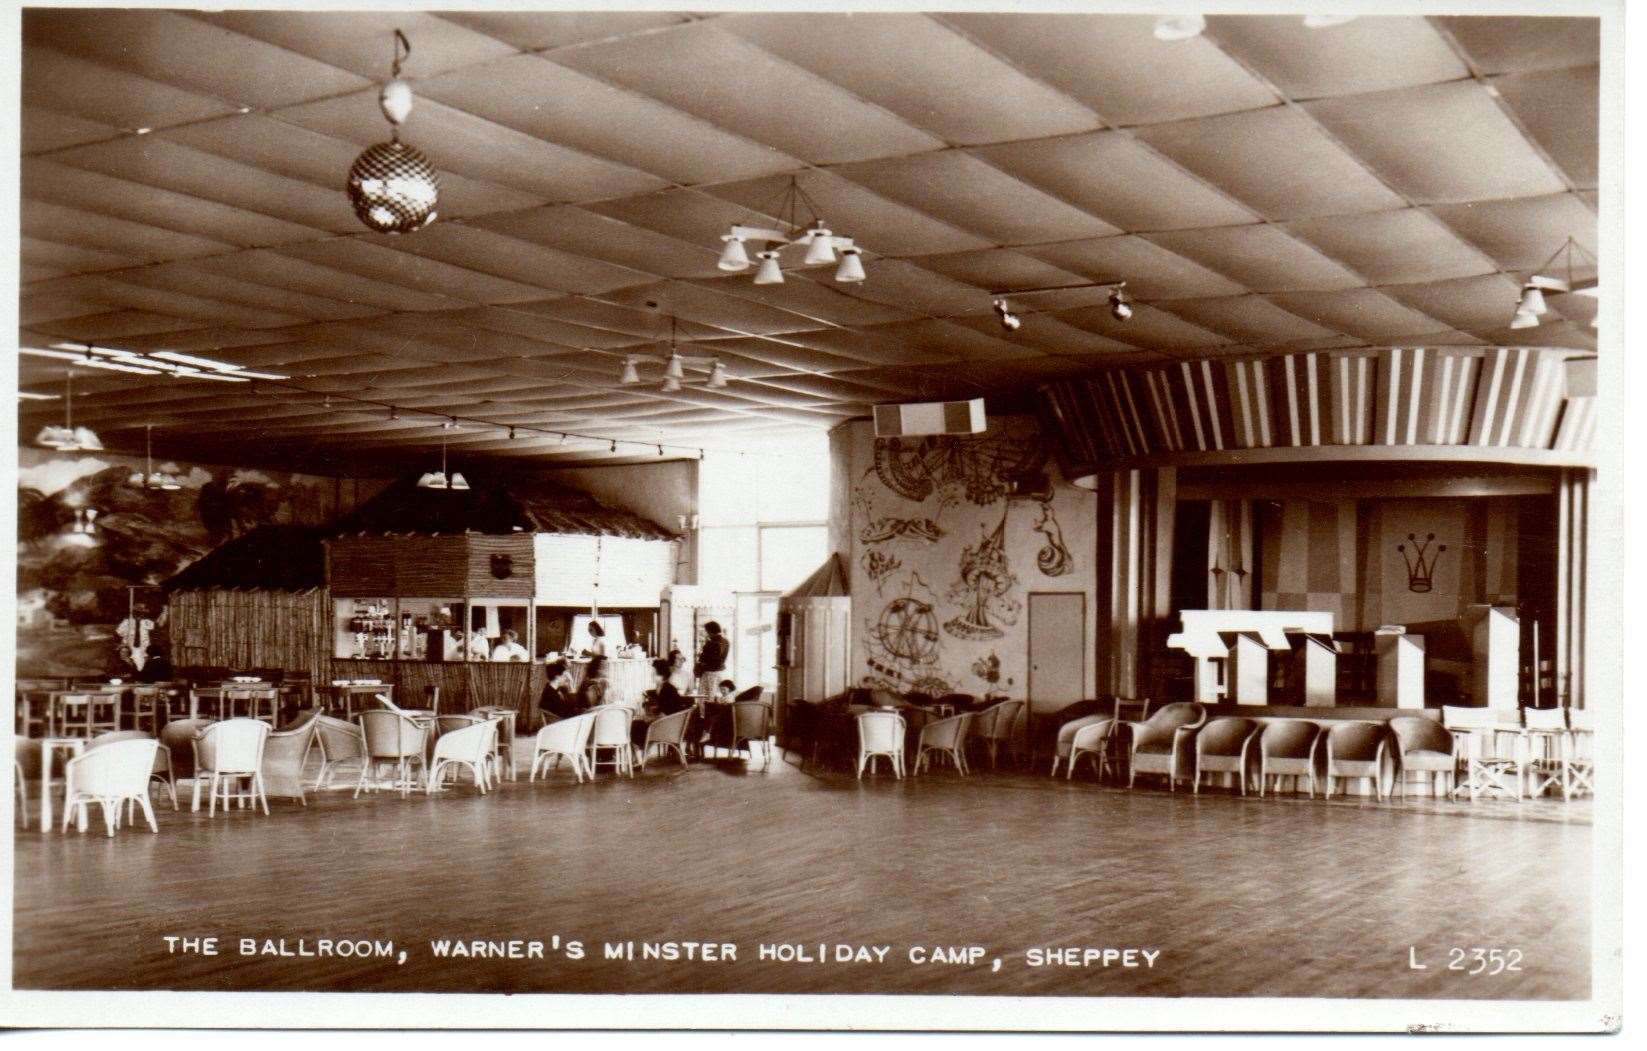 Ballroom and stage at Warners holiday camp, Minster, Sheppey. Postcard in the Matthew and Hazel Bodiam Collection